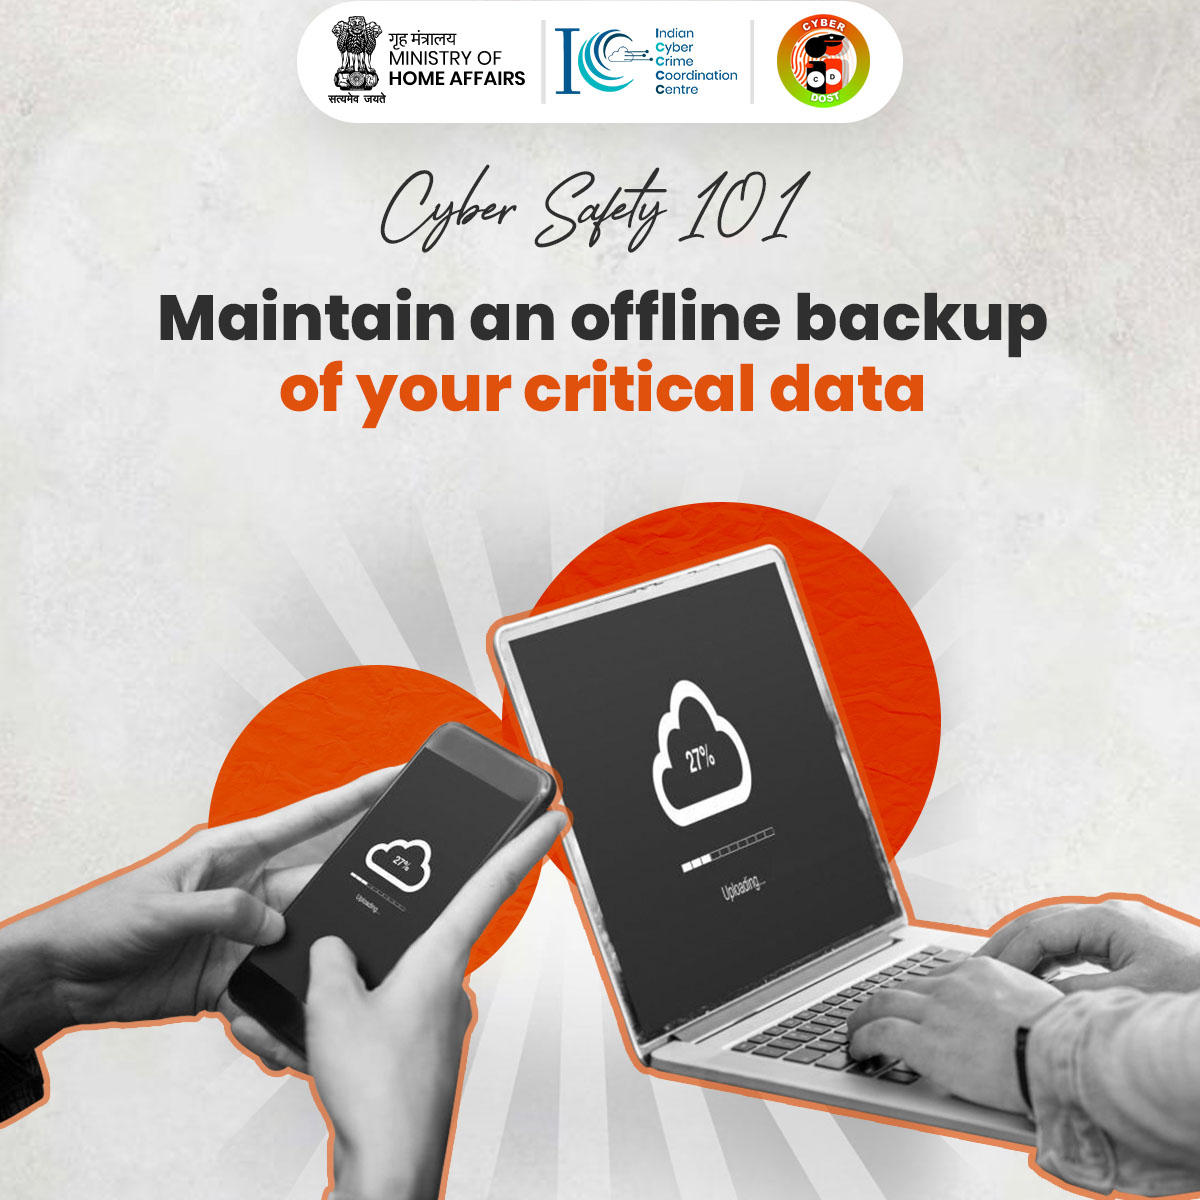 Do you understand the implications of not keeping an offline backup of your important data?
#Dial1930 in case of online financial fraud and report any #cybercrime at cybercrime.gov.in
#CyberSafety101 #CyberAware #OnlineSafety #DataBackUp #Contacts #Passwords #IdentityProof